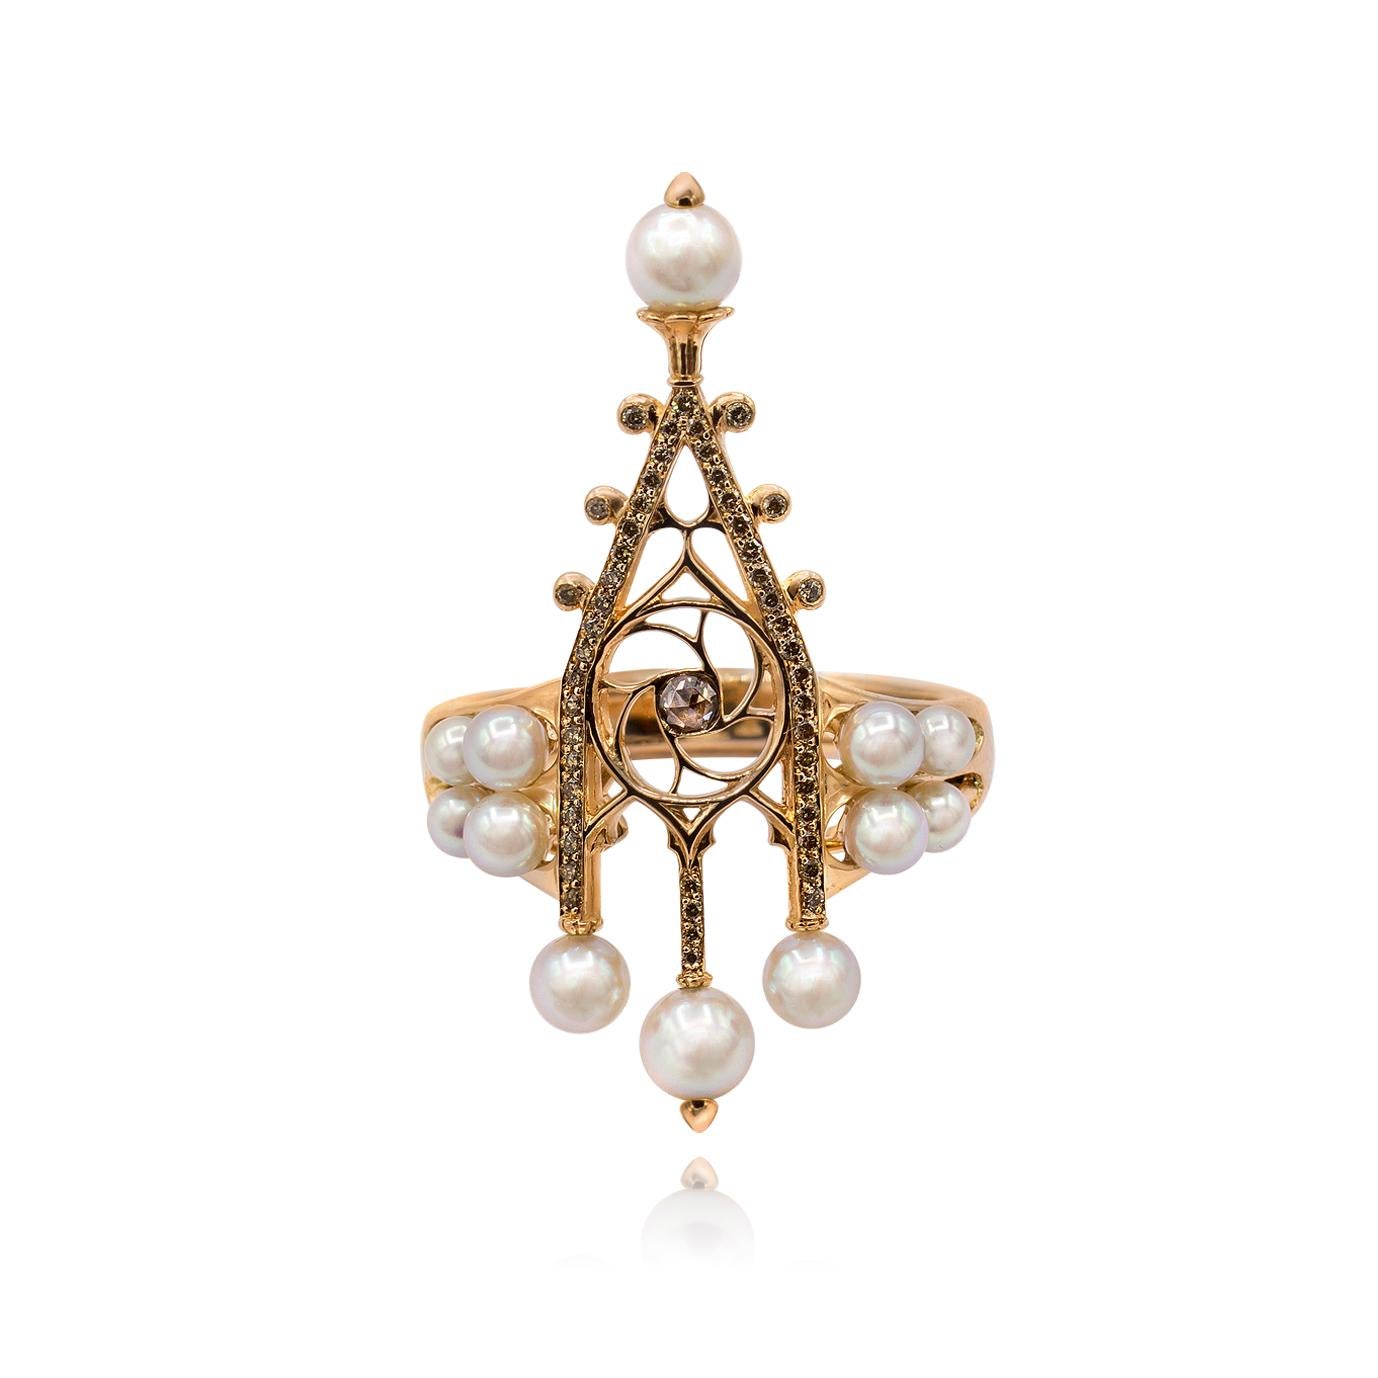 Brown Diamonds 0.17 cts - Baby Pink Akoya Pearls 12 pcs 2.55 cts (from 2.5 up to 4.5mm)                                                            

The Glass Pinnacle Ring takes it's inspiration from the Gothic architecture of the Milan Cathedral.